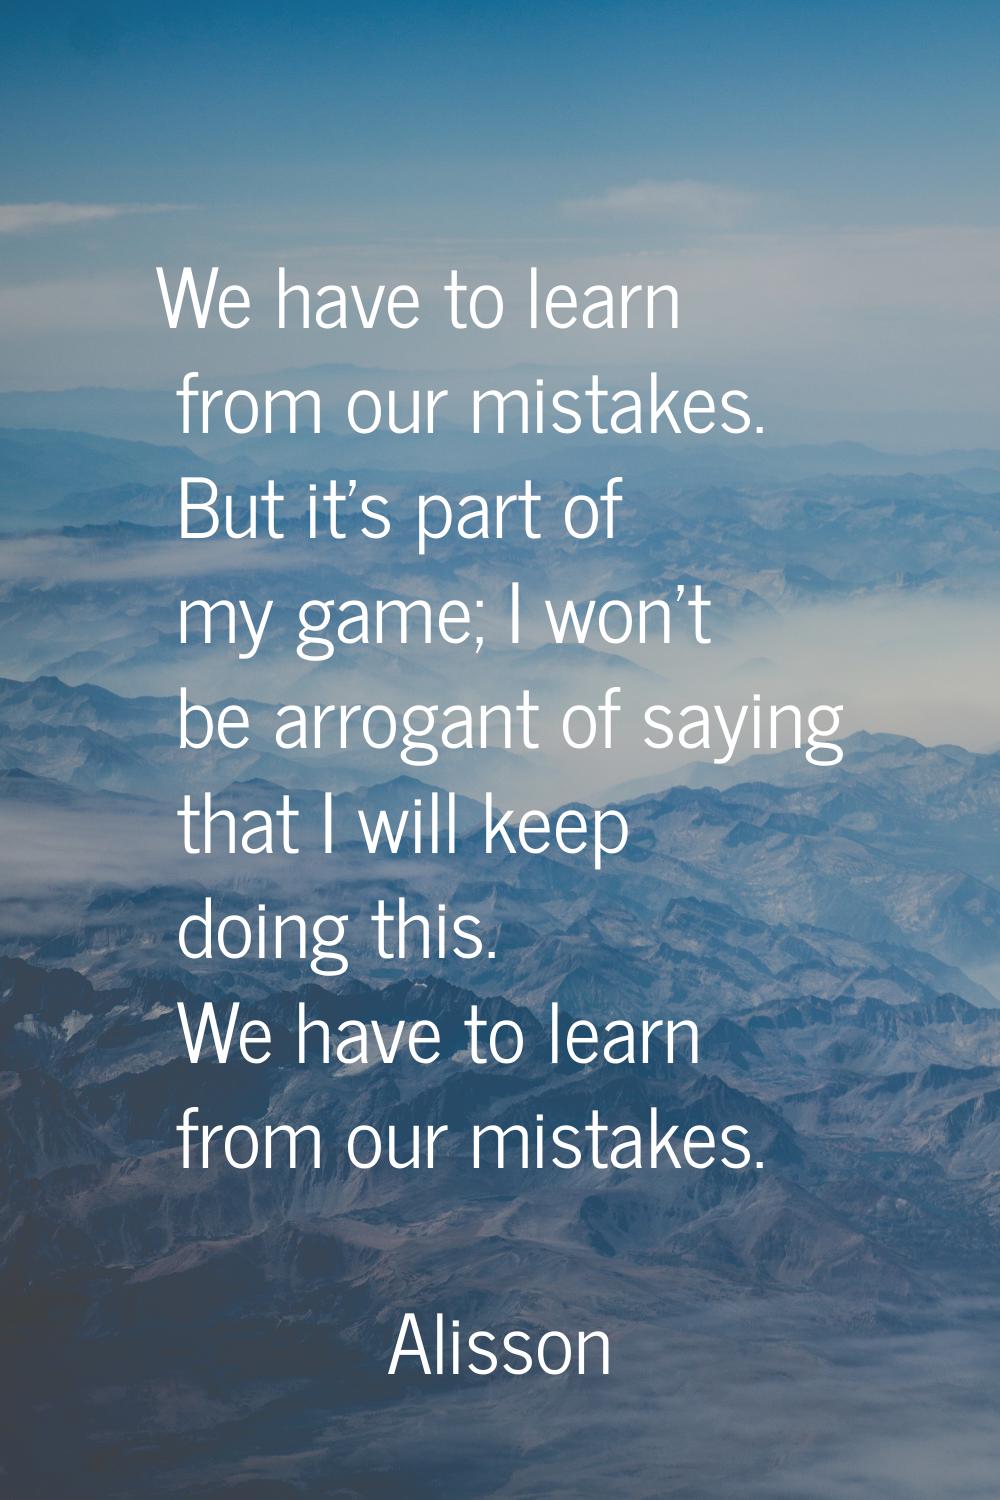 We have to learn from our mistakes. But it's part of my game; I won't be arrogant of saying that I 